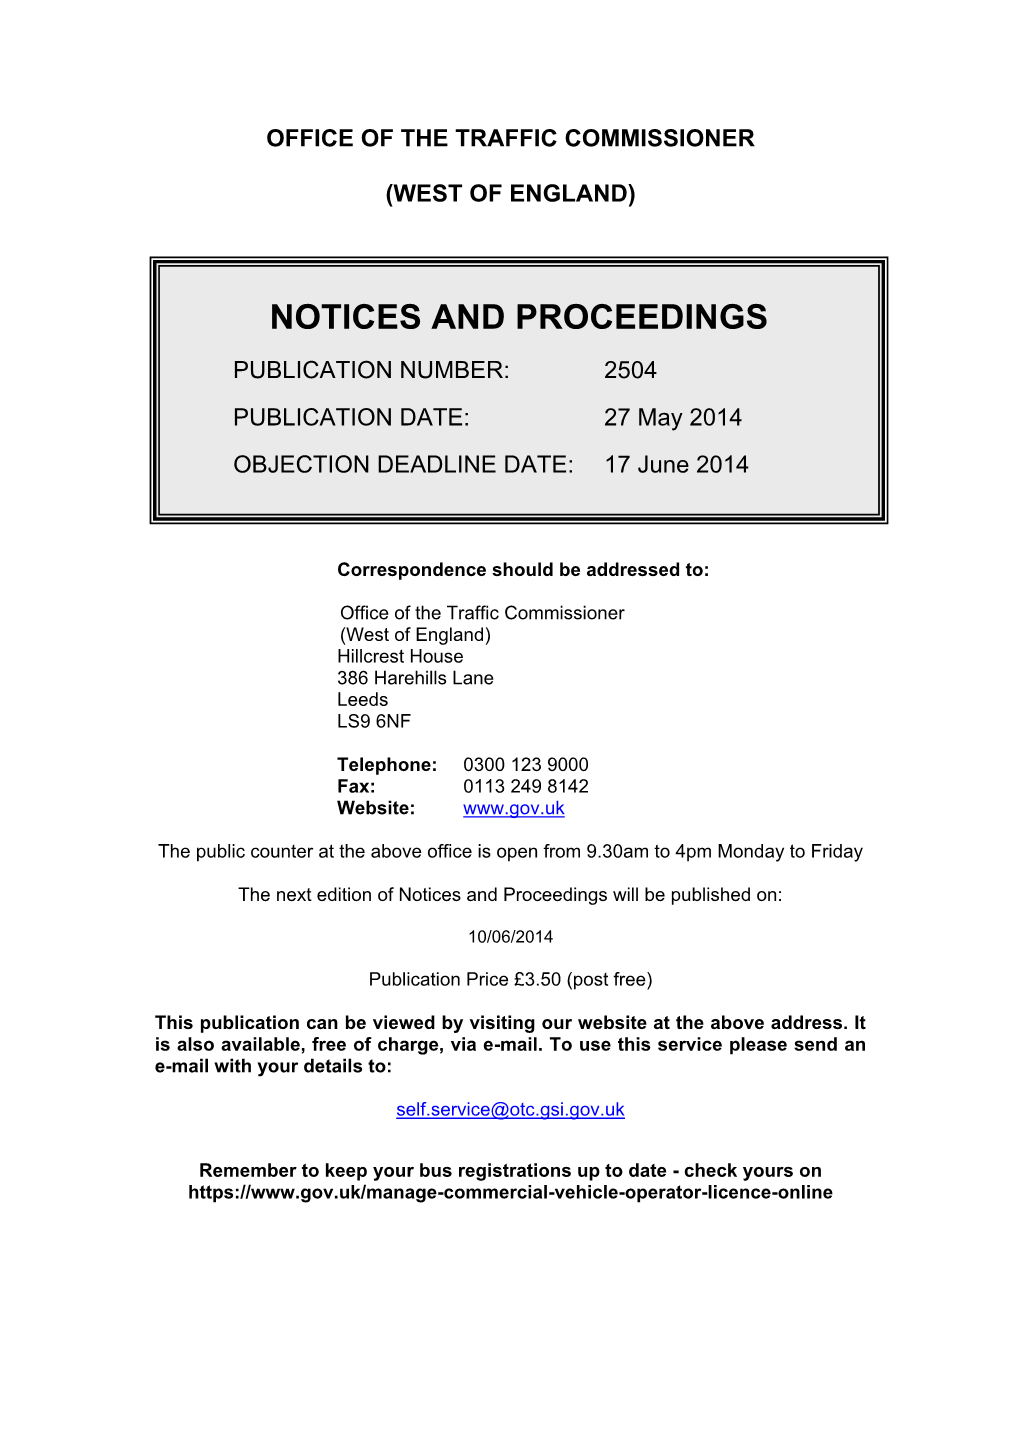 Notices and Proceedings: West of England: 27 May 2014